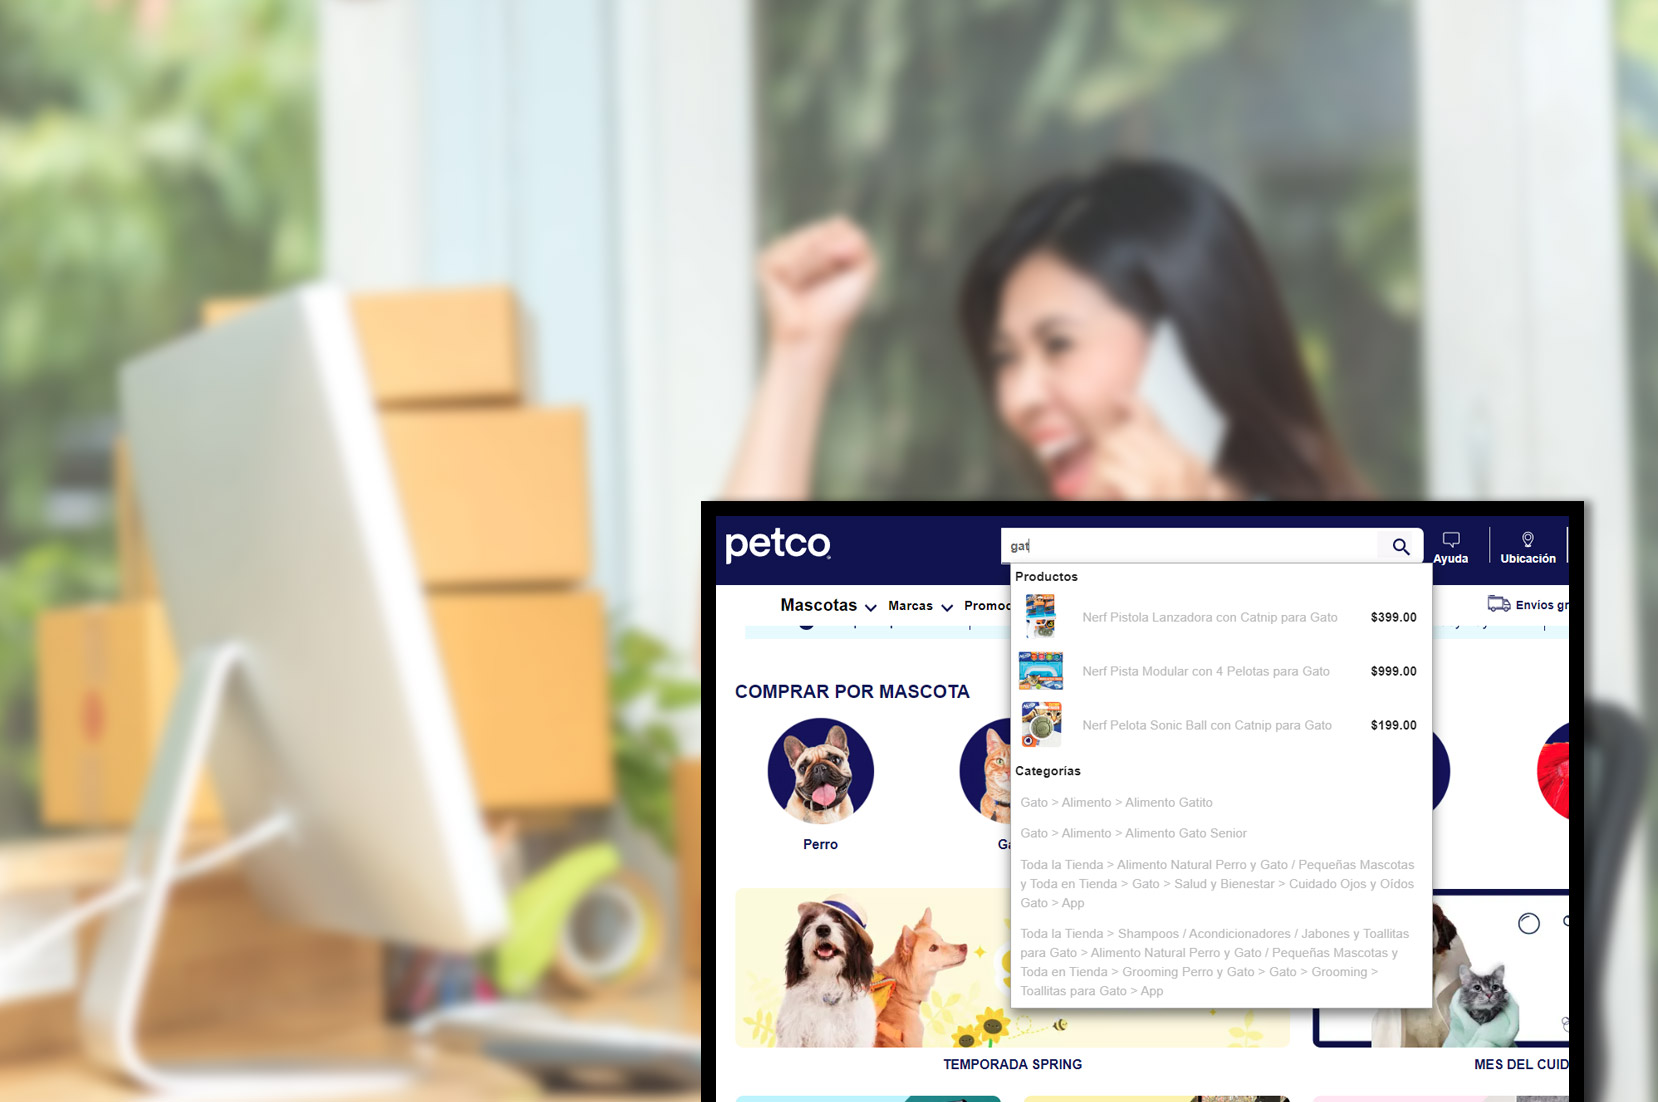 petco-comproduct-categories-keywords-and-brand-scraping-services